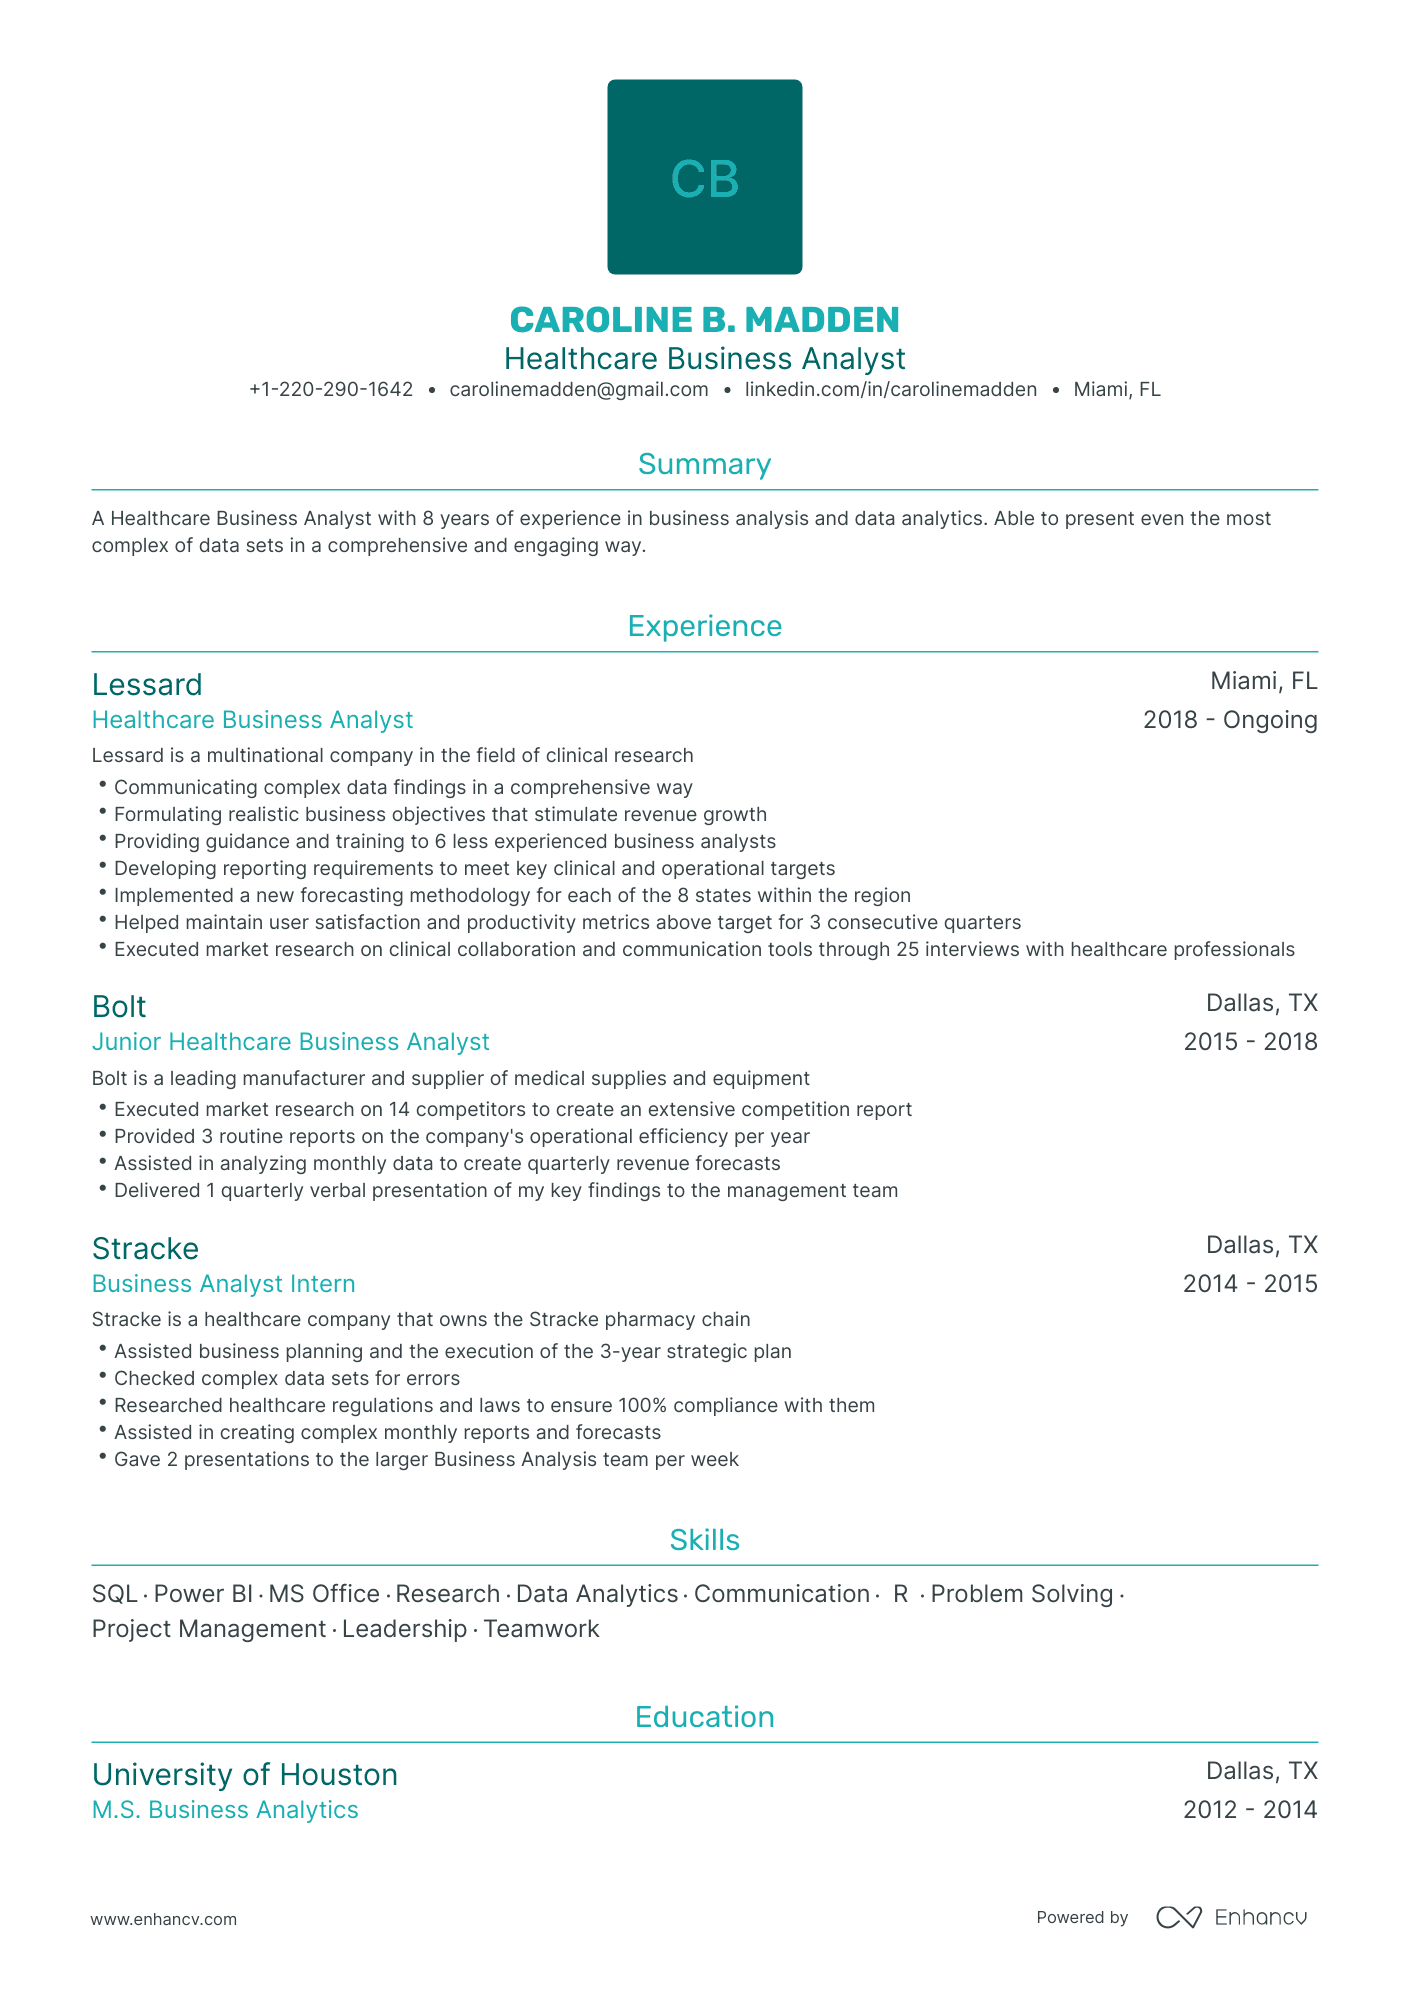 Traditional Healthcare Business Analyst Resume Template